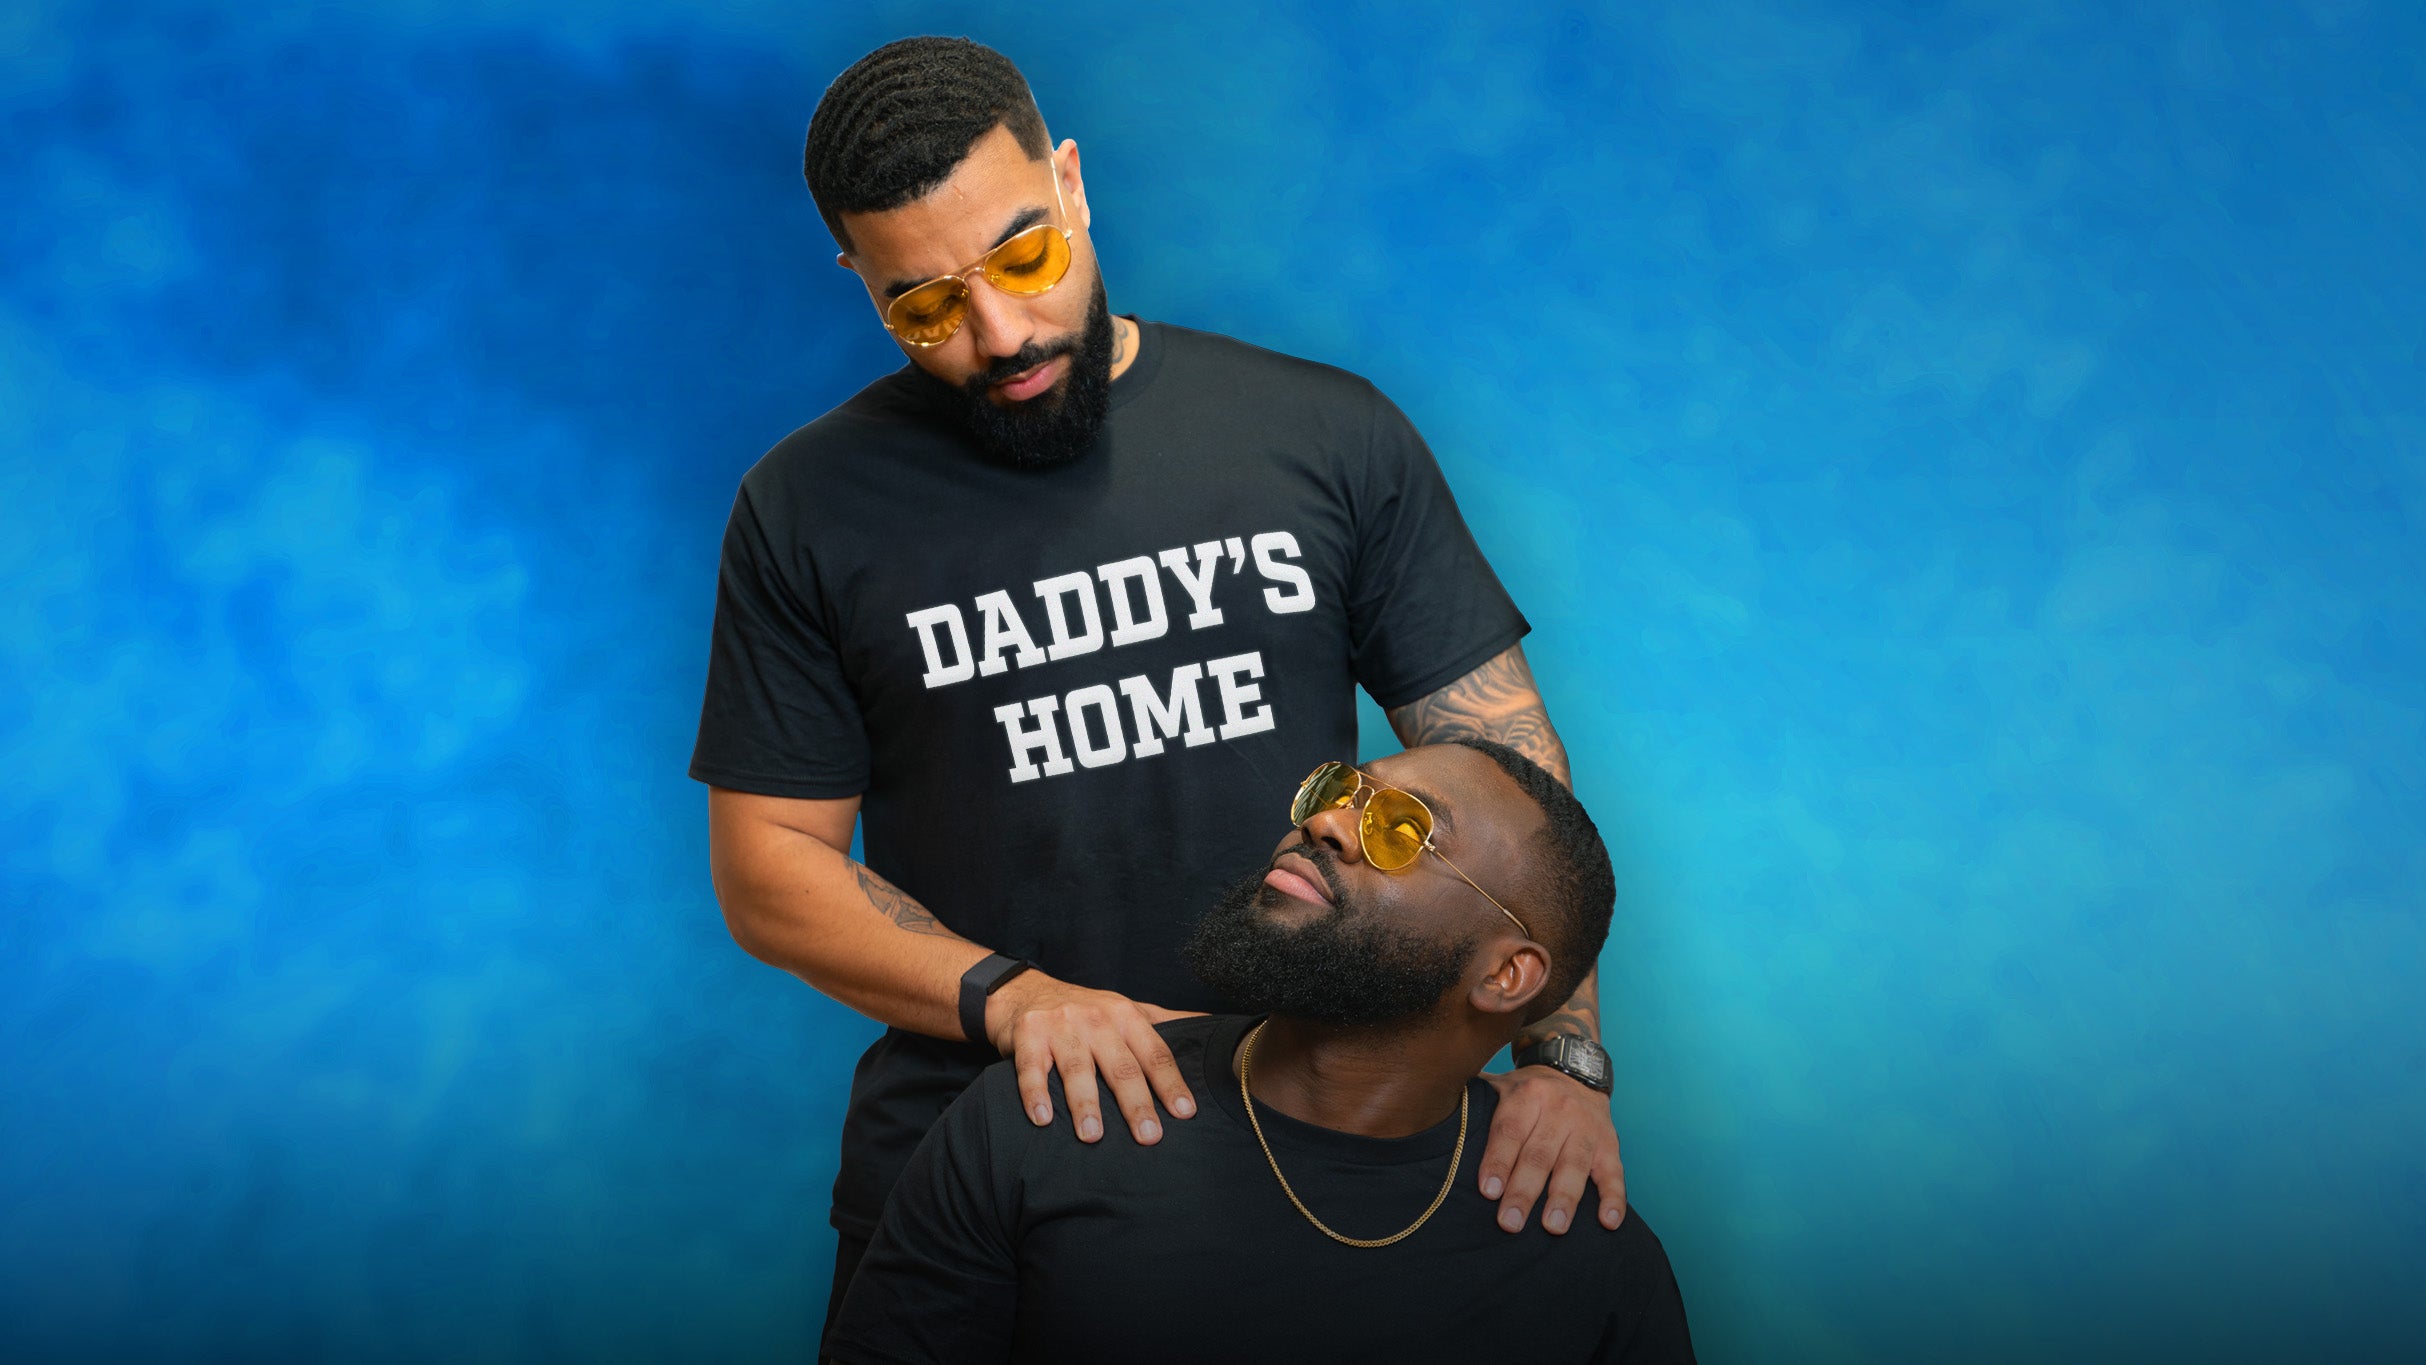 ShxtsNGigs: Daddy's Home Tour presale password for show tickets in Charlotte, NC (The Fillmore Charlotte)